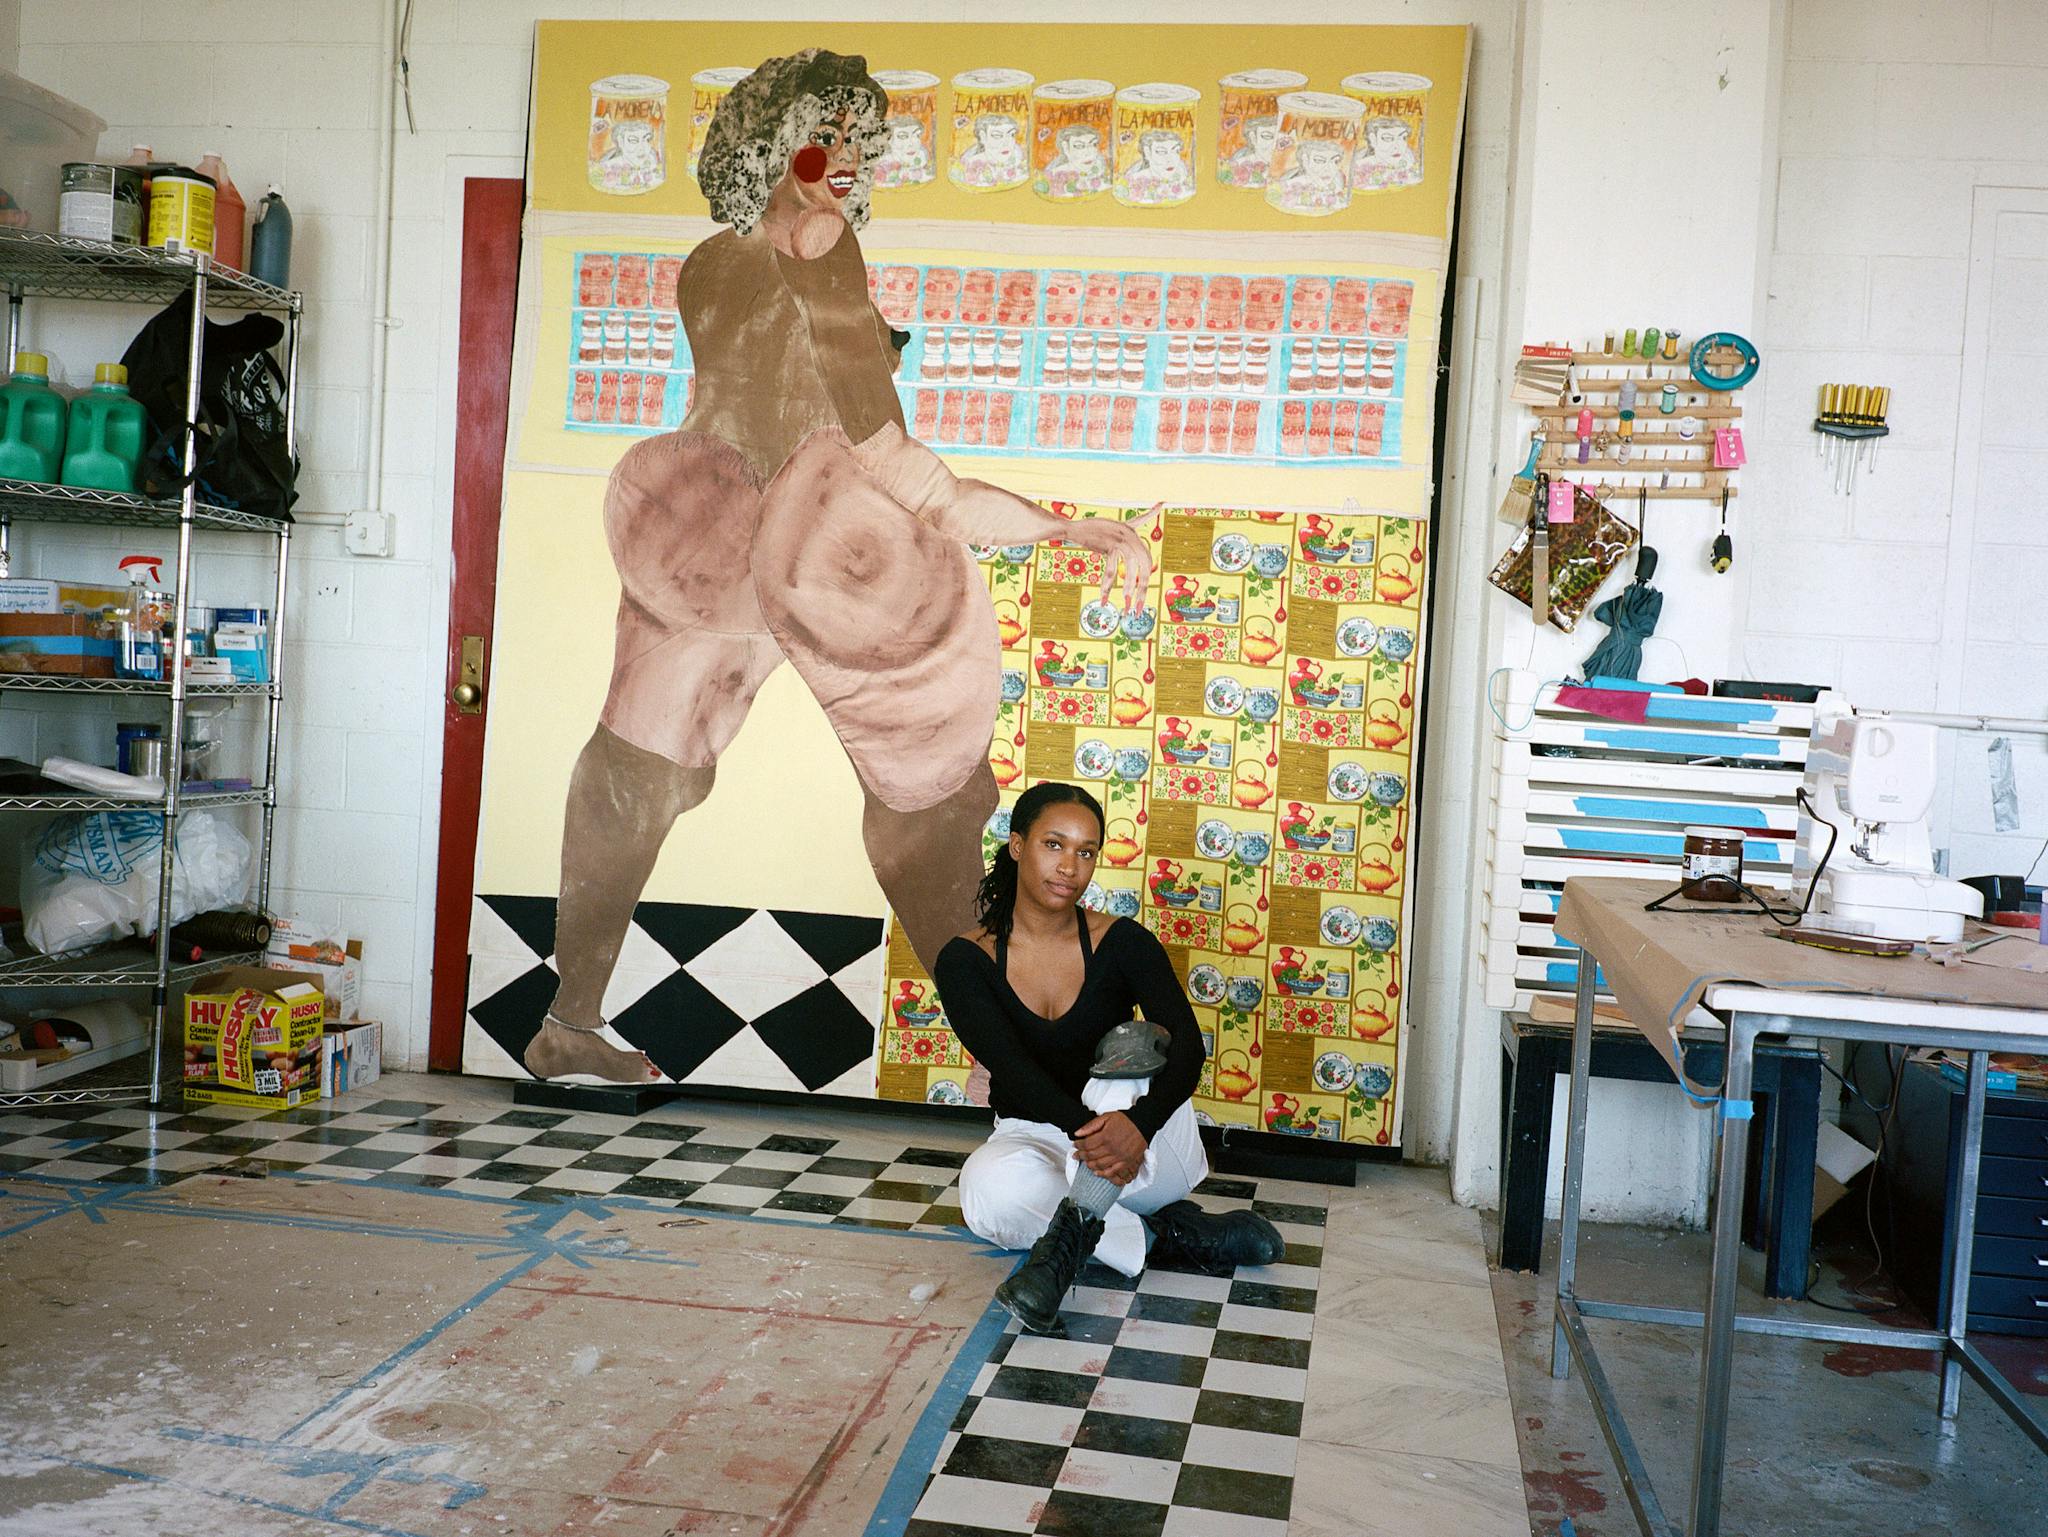 Tschabalala Self is in her studio, poised in front of a work that features that image of a woman's bare form.